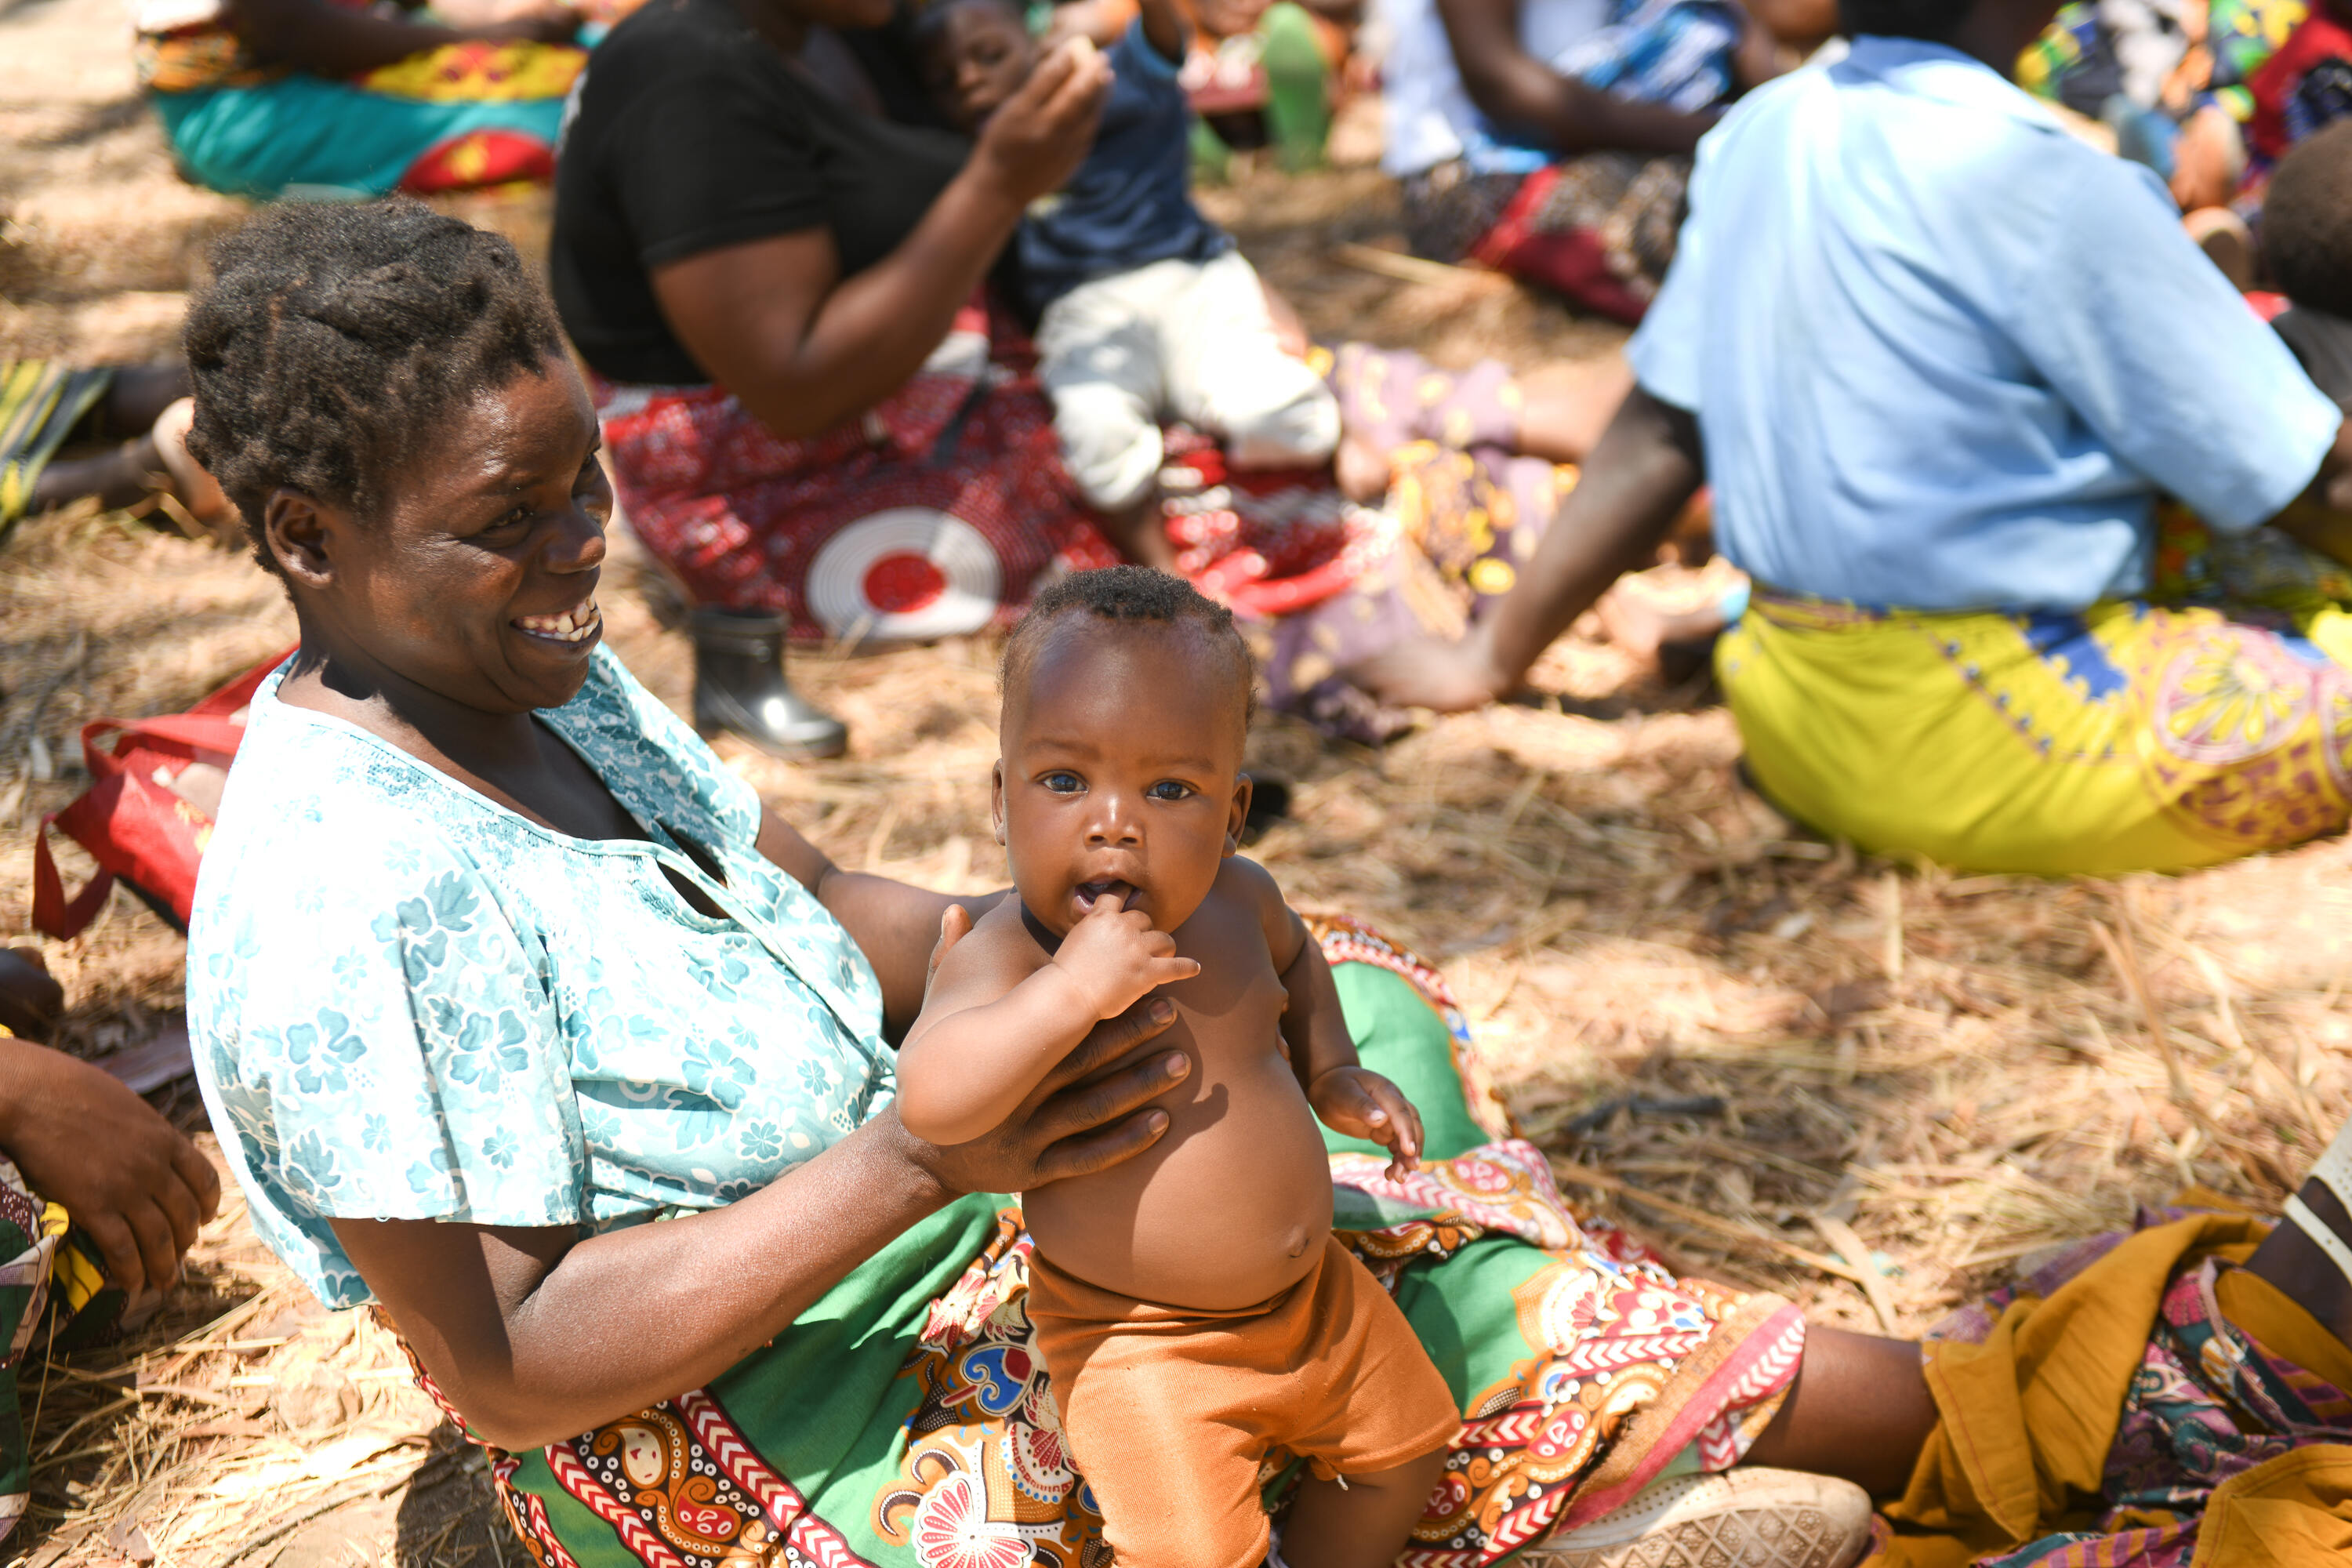 36-year-old Chancy Thika and her 7 months old son George Banda are seen at Chiwinga Village in Kasungu District, Central Malawi.